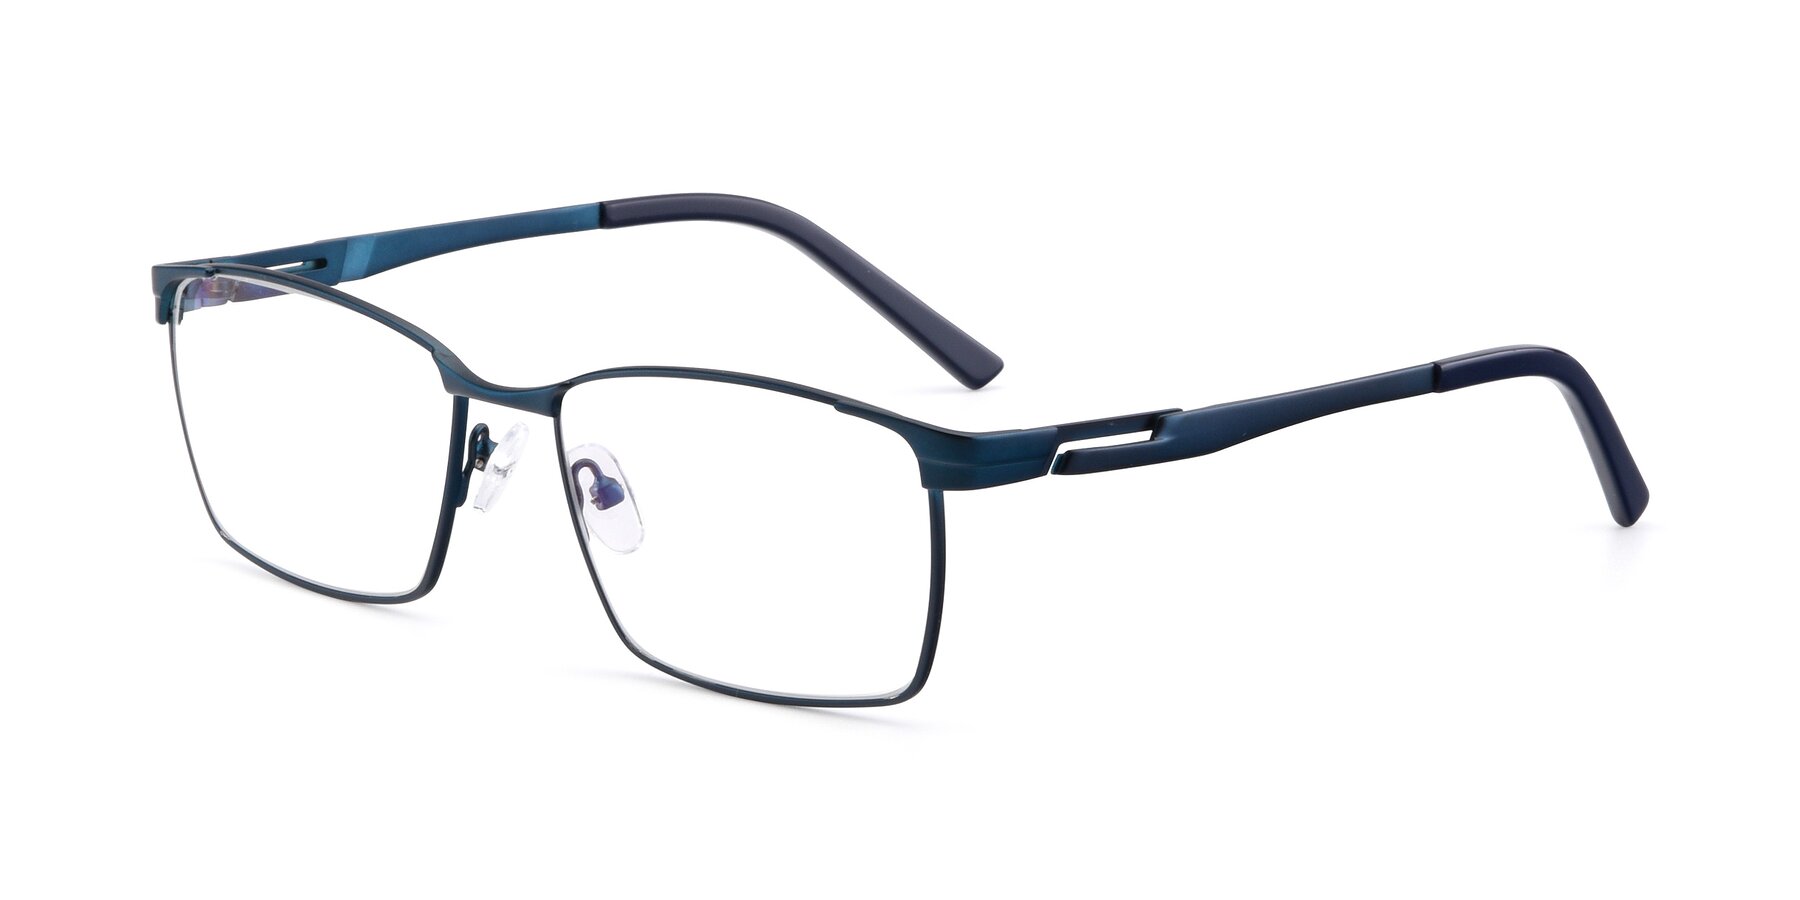 Angle of 19021 in Blue with Clear Eyeglass Lenses